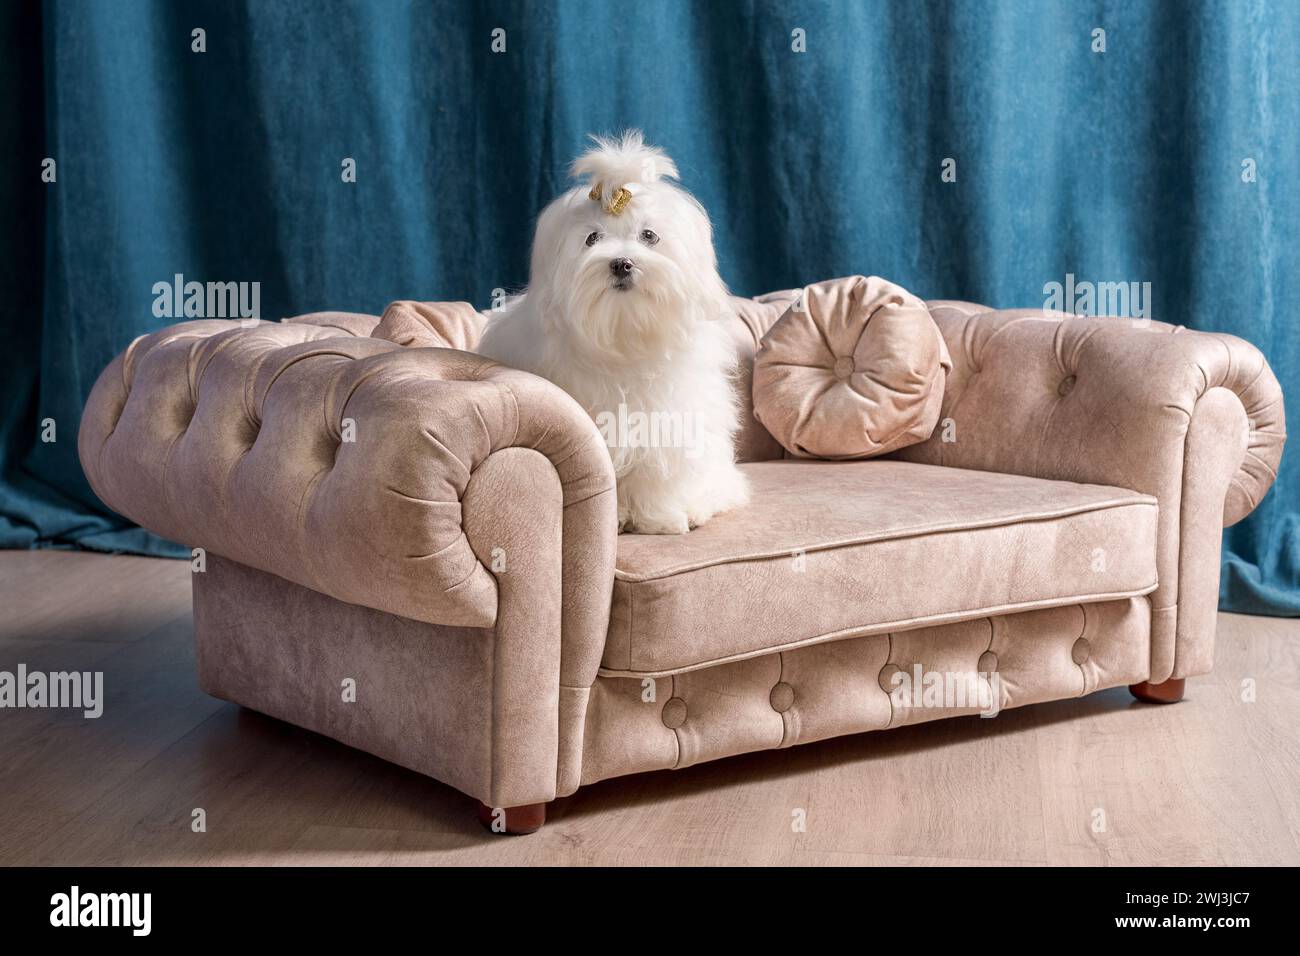 White Maltese dog sitting on a small beige sofa against a background of dark blue curtains Stock Photo